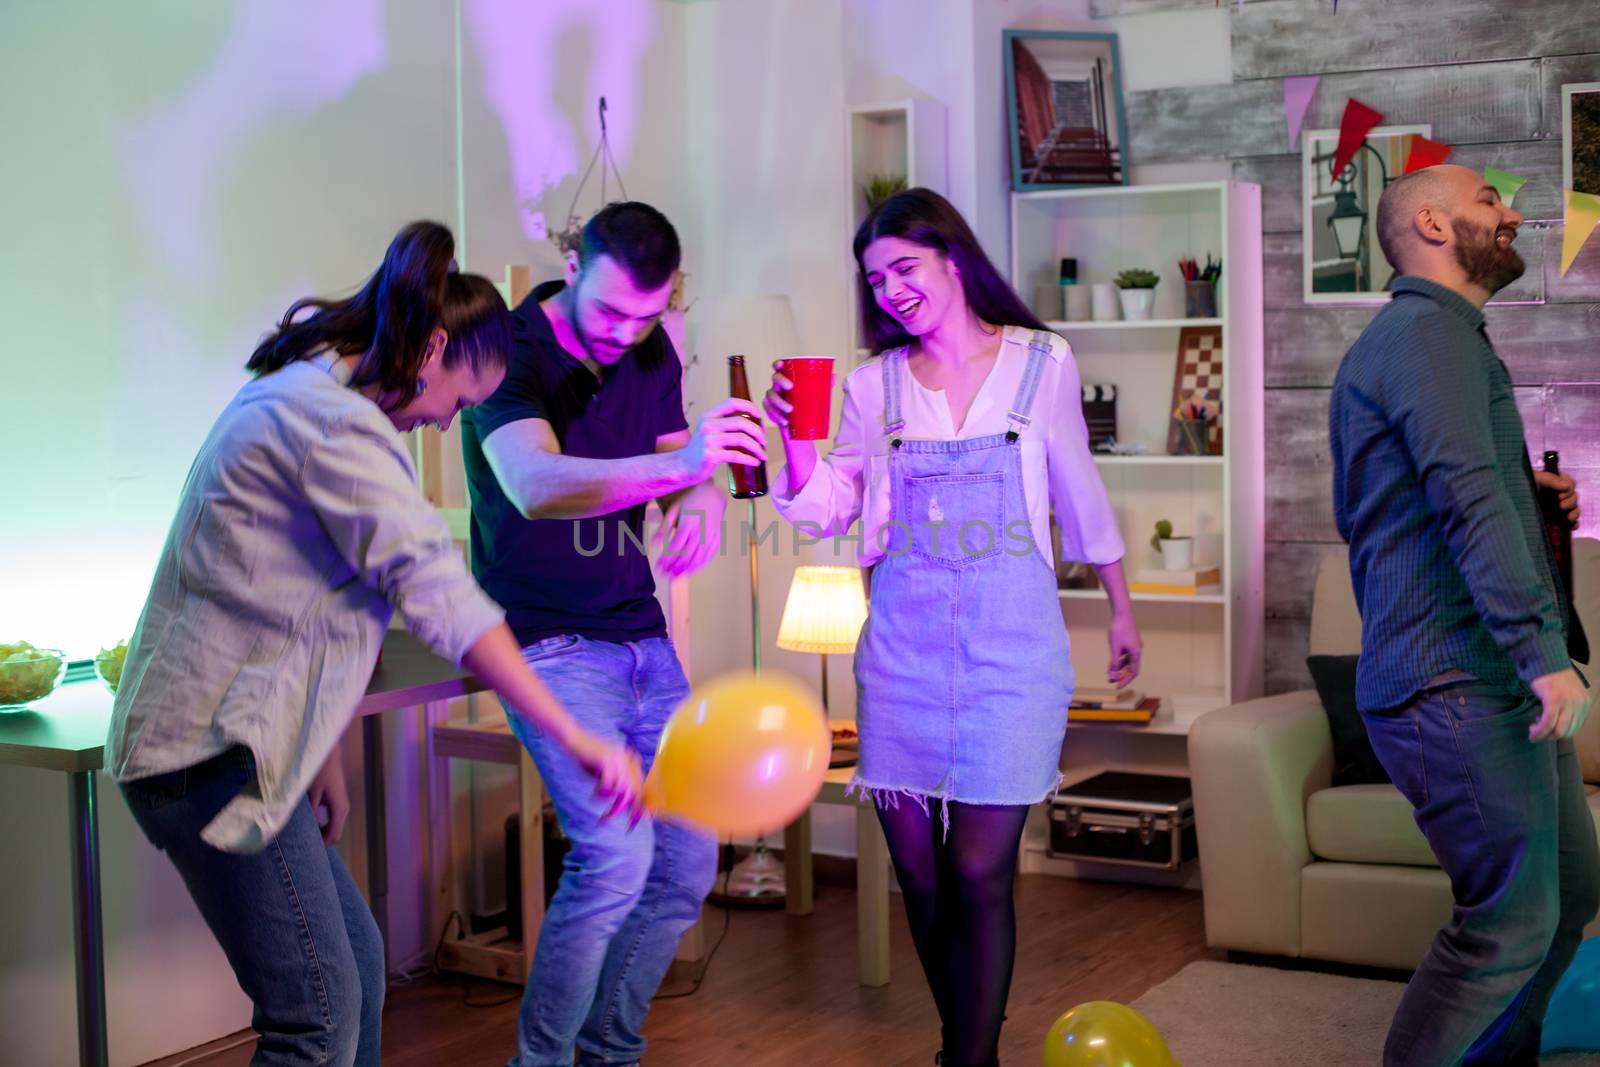 Cheerful young man holding a beer bottle while dancing with his friends at a party with disco music and balloons.